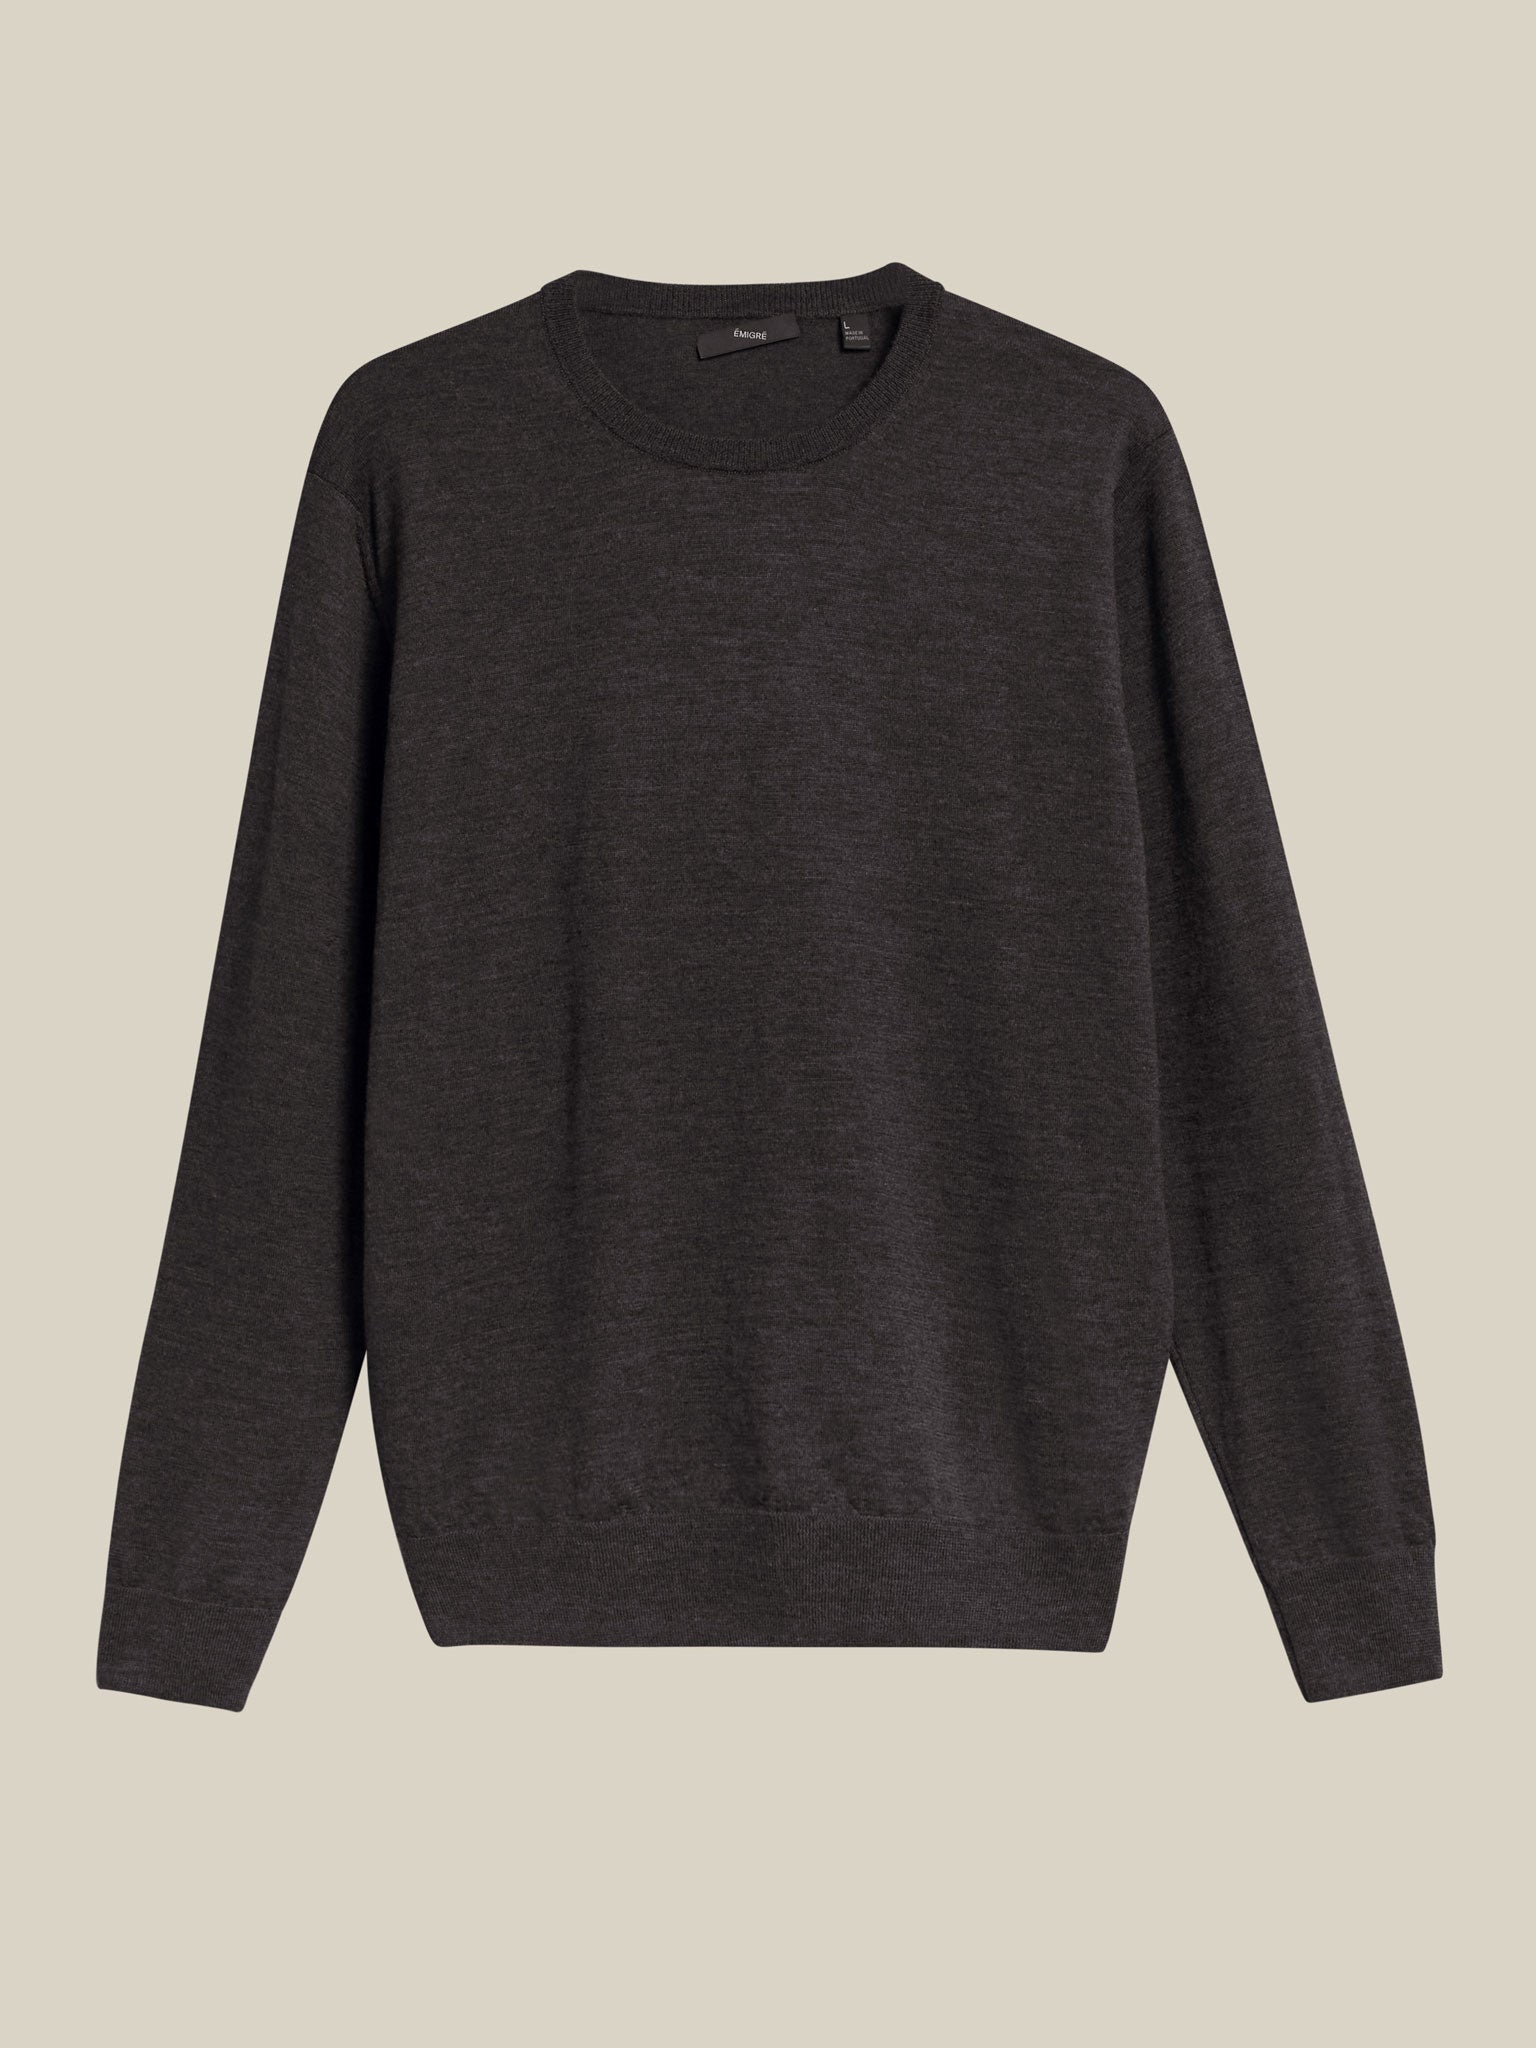 grey merino wool sweater, perfect for comfort and style when travelling